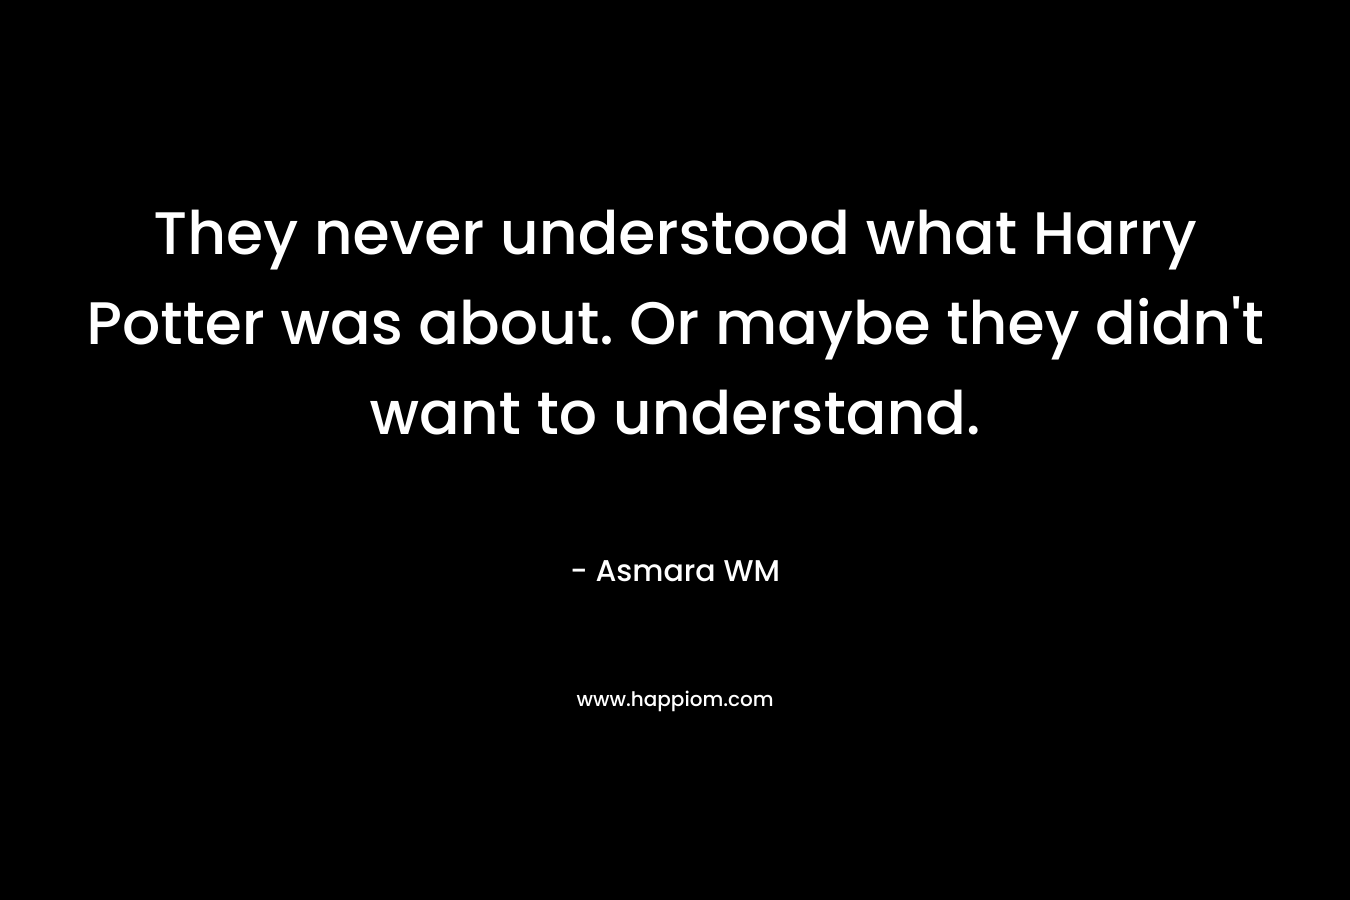 They never understood what Harry Potter was about. Or maybe they didn’t want to understand. – Asmara WM